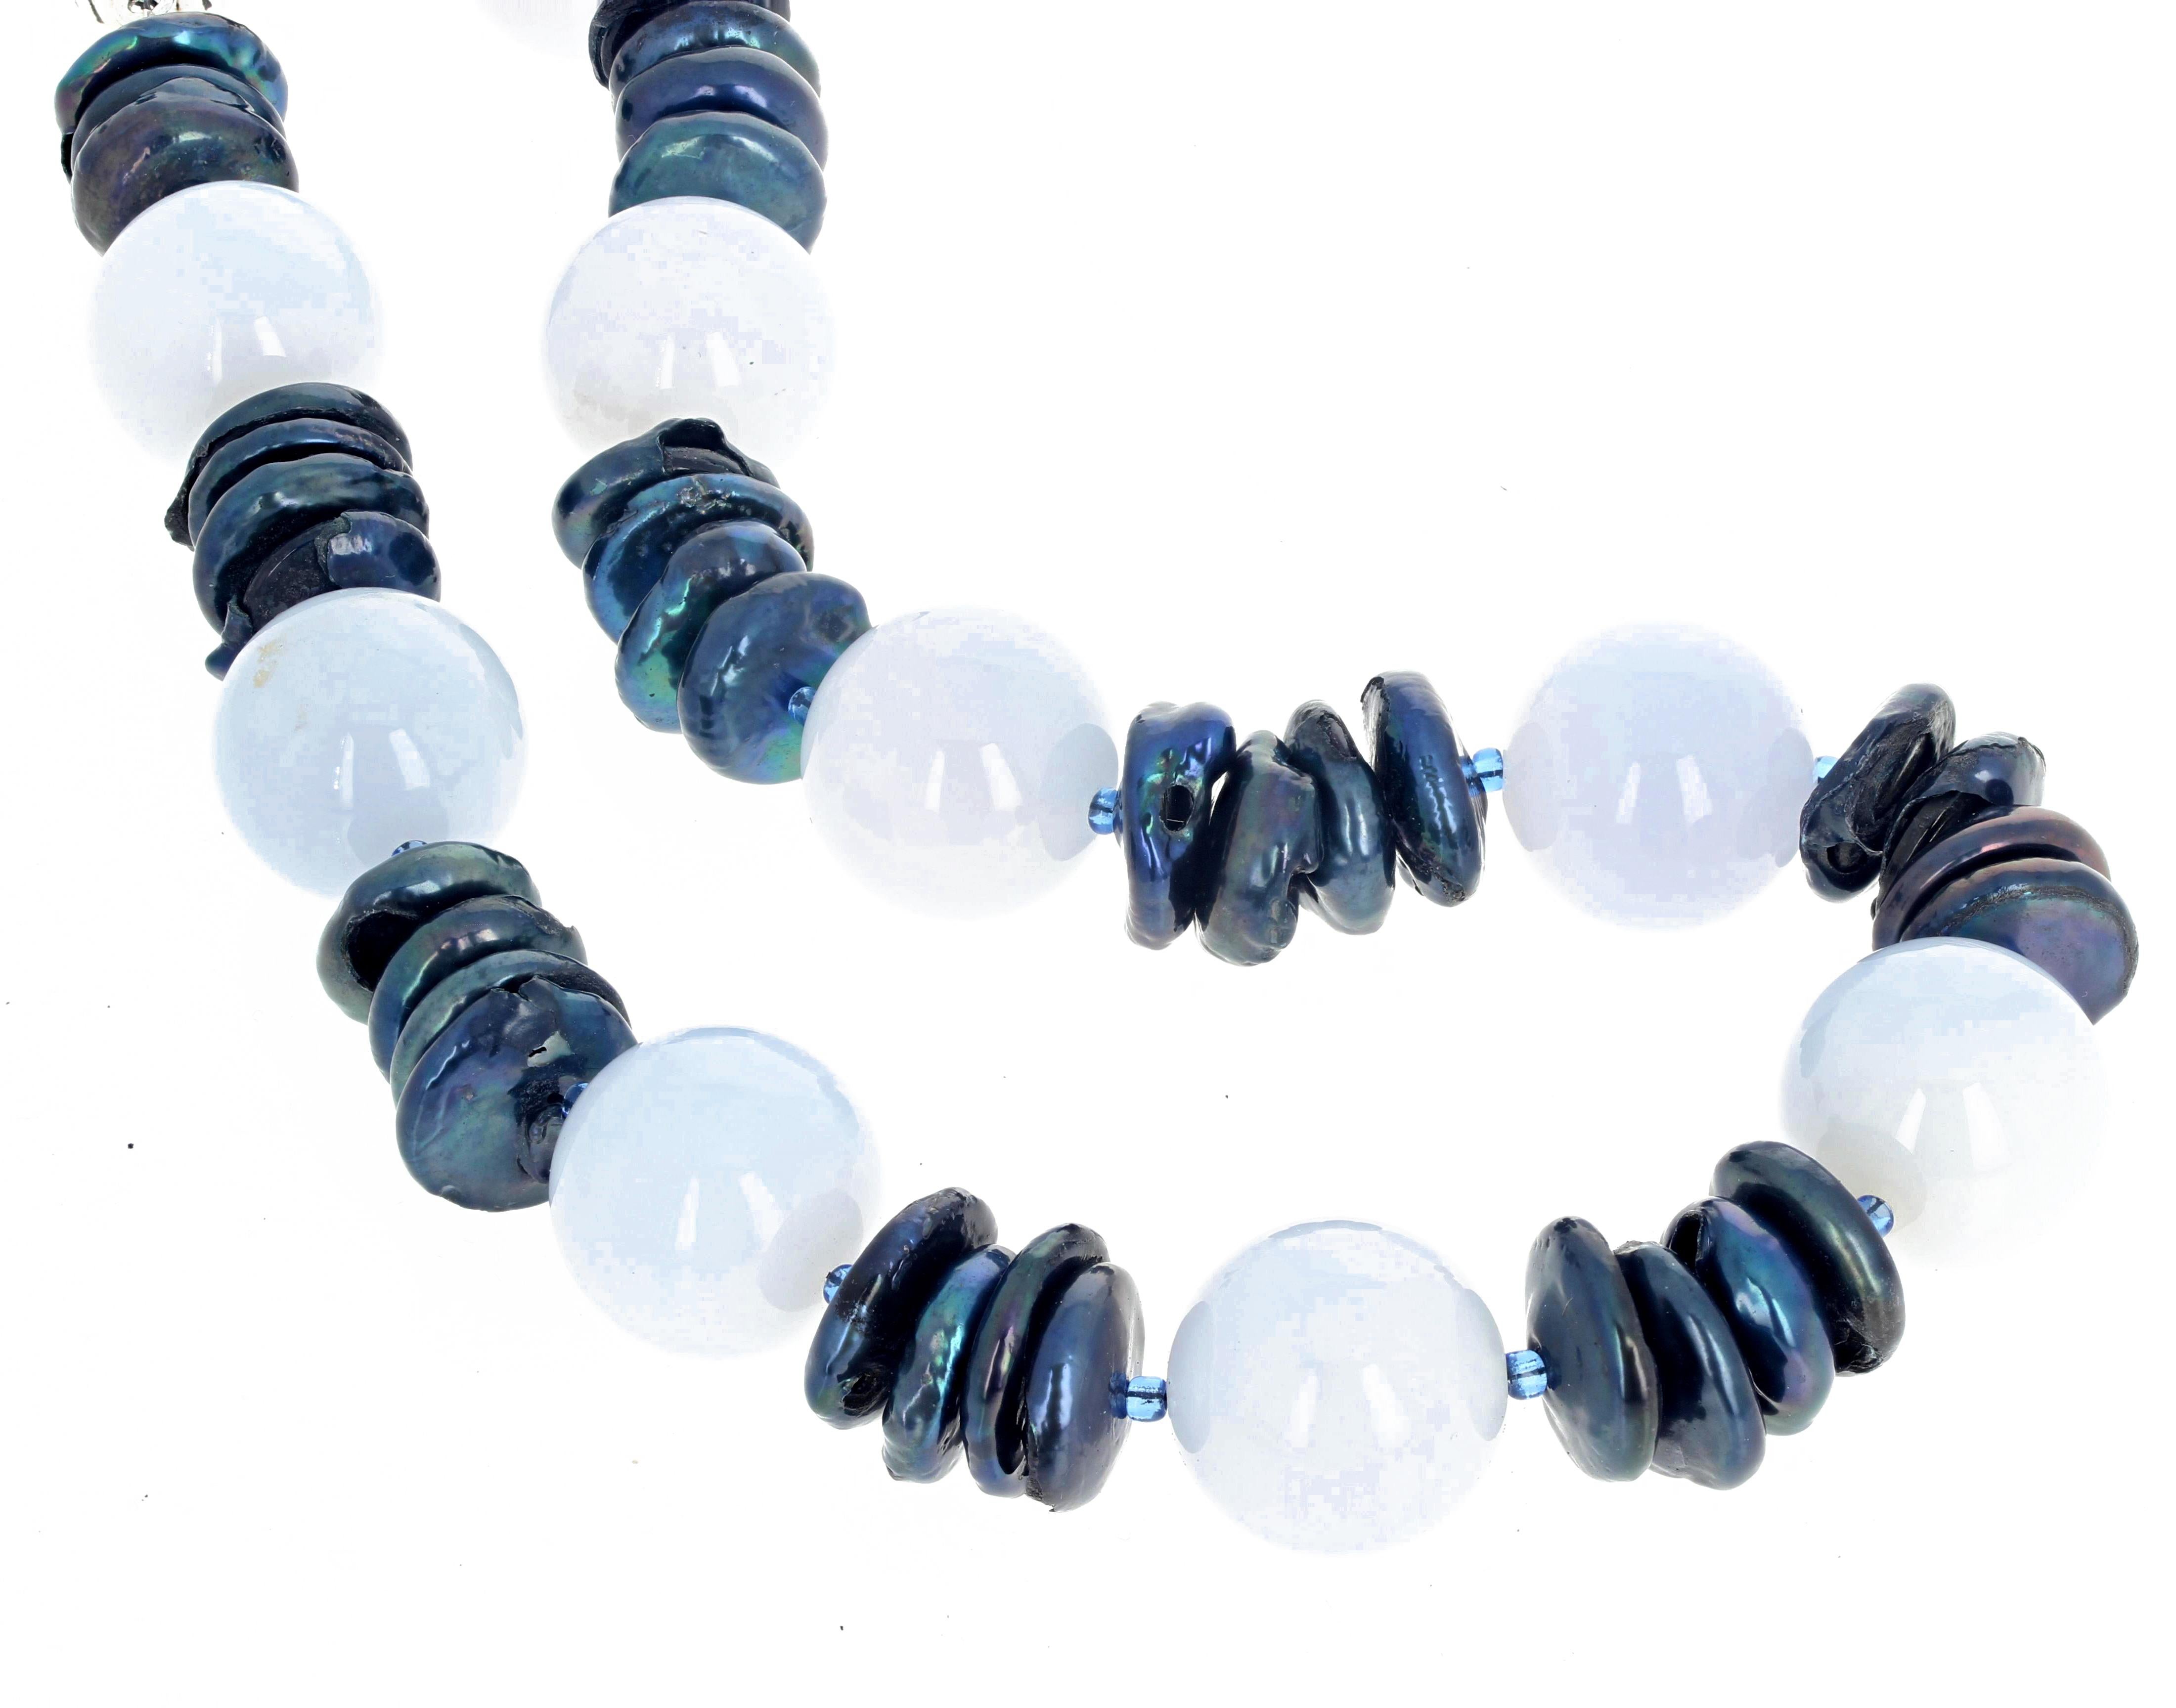 Gorgeous big round polished glowing 20mm Chalcedony gems interspersed with chipped and chunky Pearls in this handmade 17.5 inch necklace with Sterling Silver clasp.  